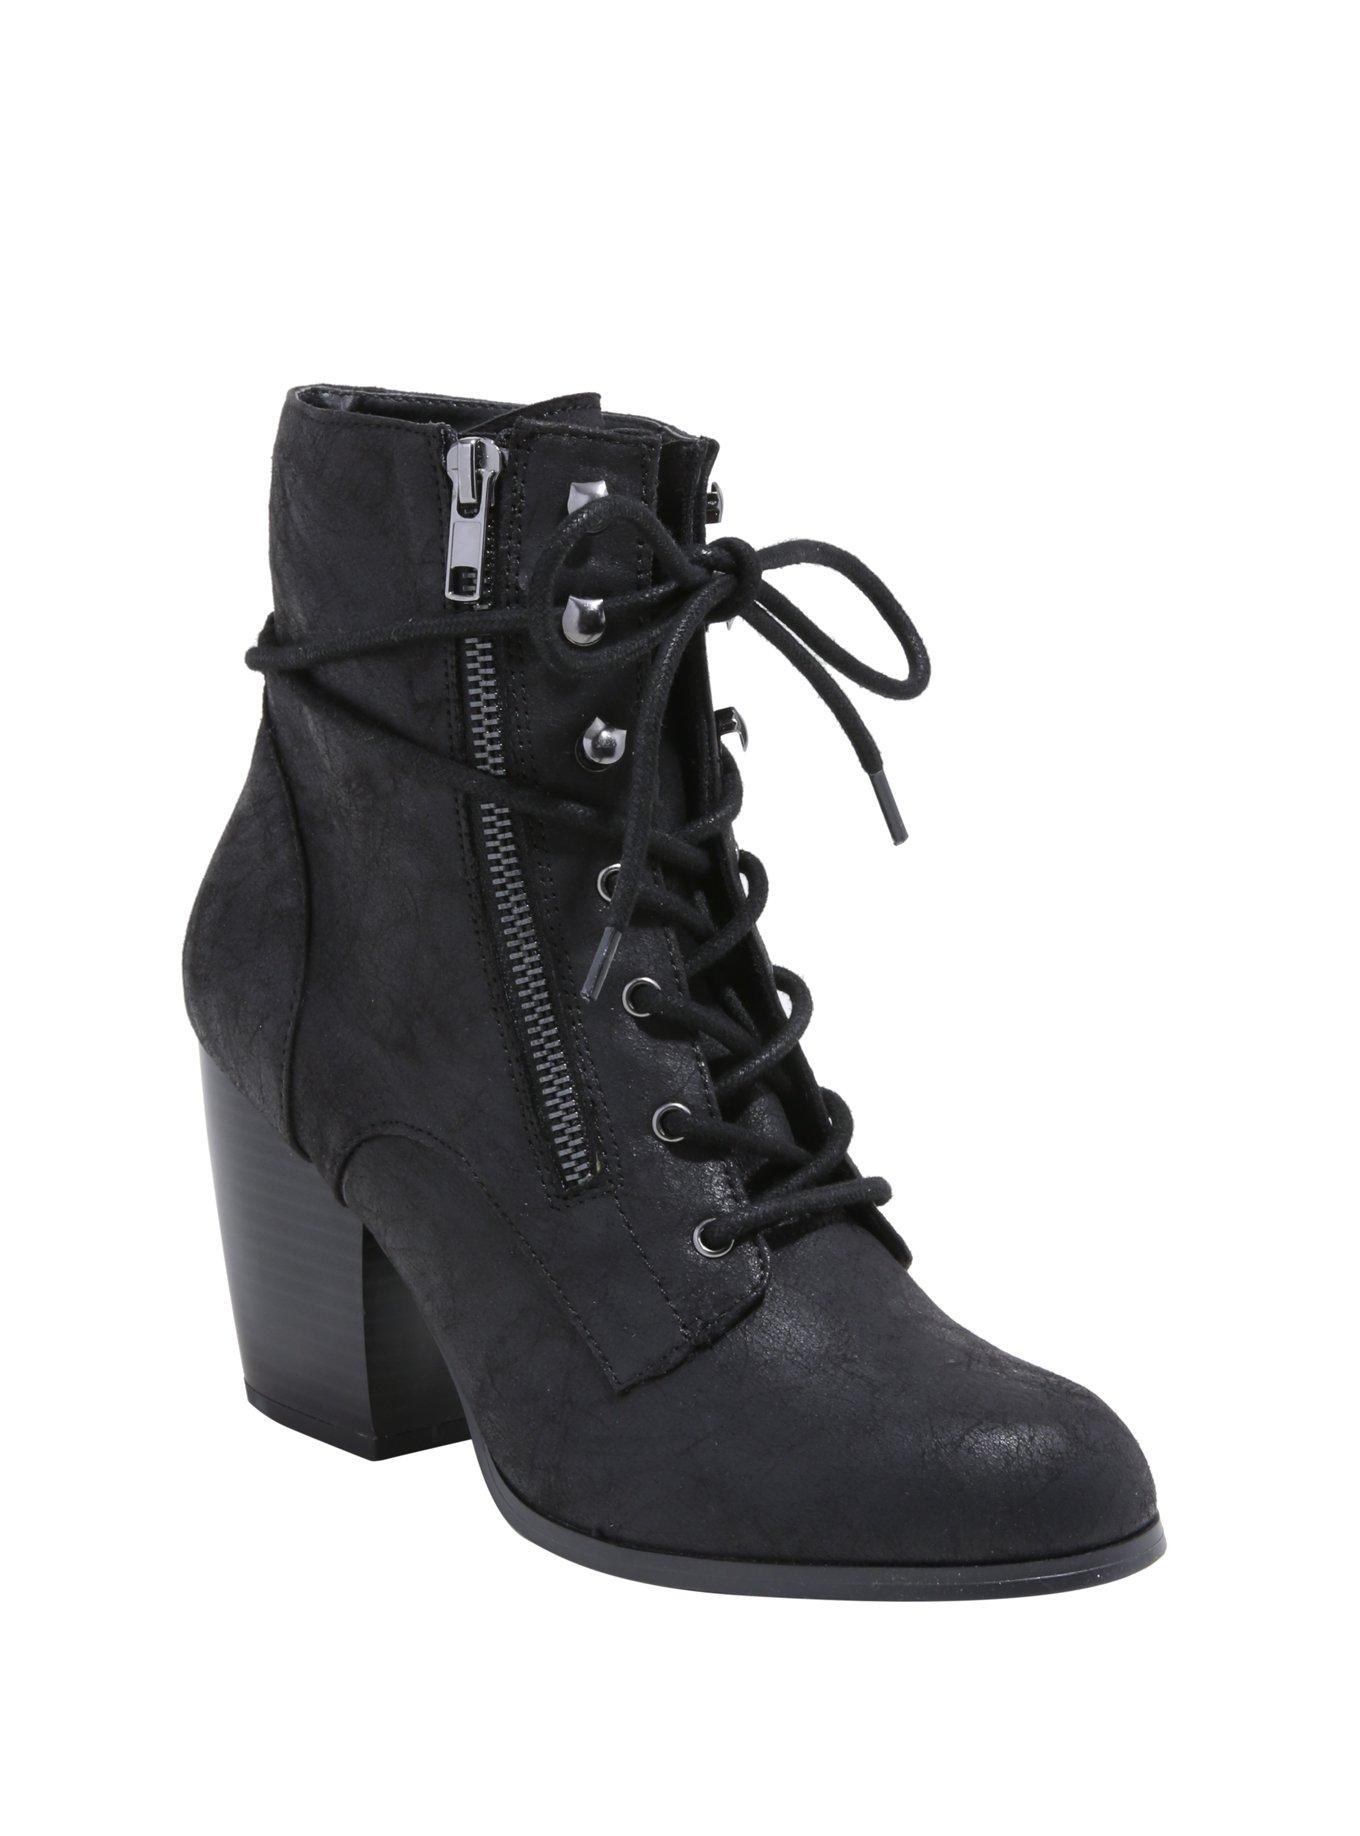 Black Lace-Up Zipper Booties | Hot Topic